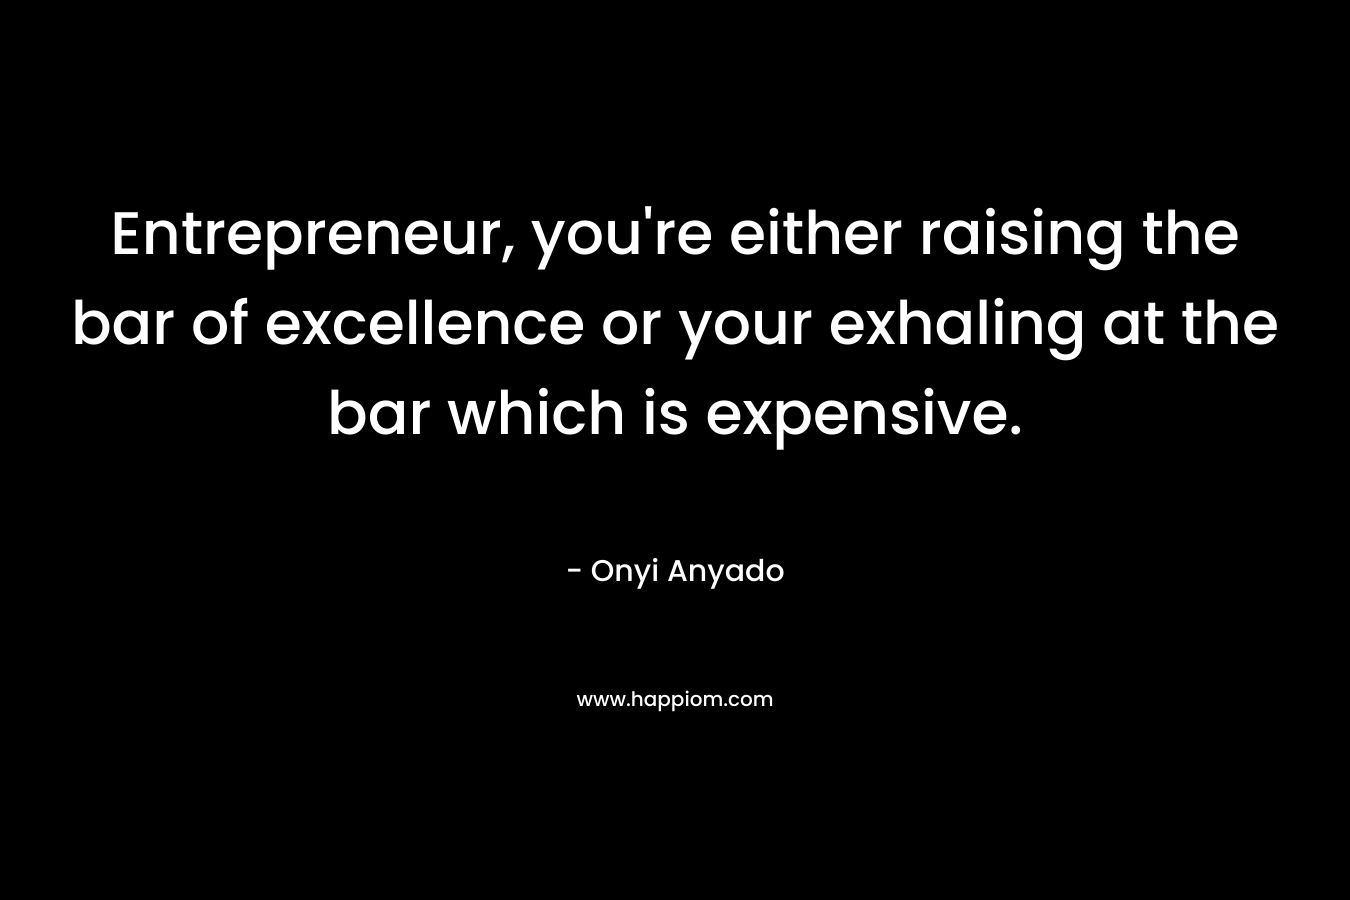 Entrepreneur, you’re either raising the bar of excellence or your exhaling at the bar which is expensive. – Onyi Anyado